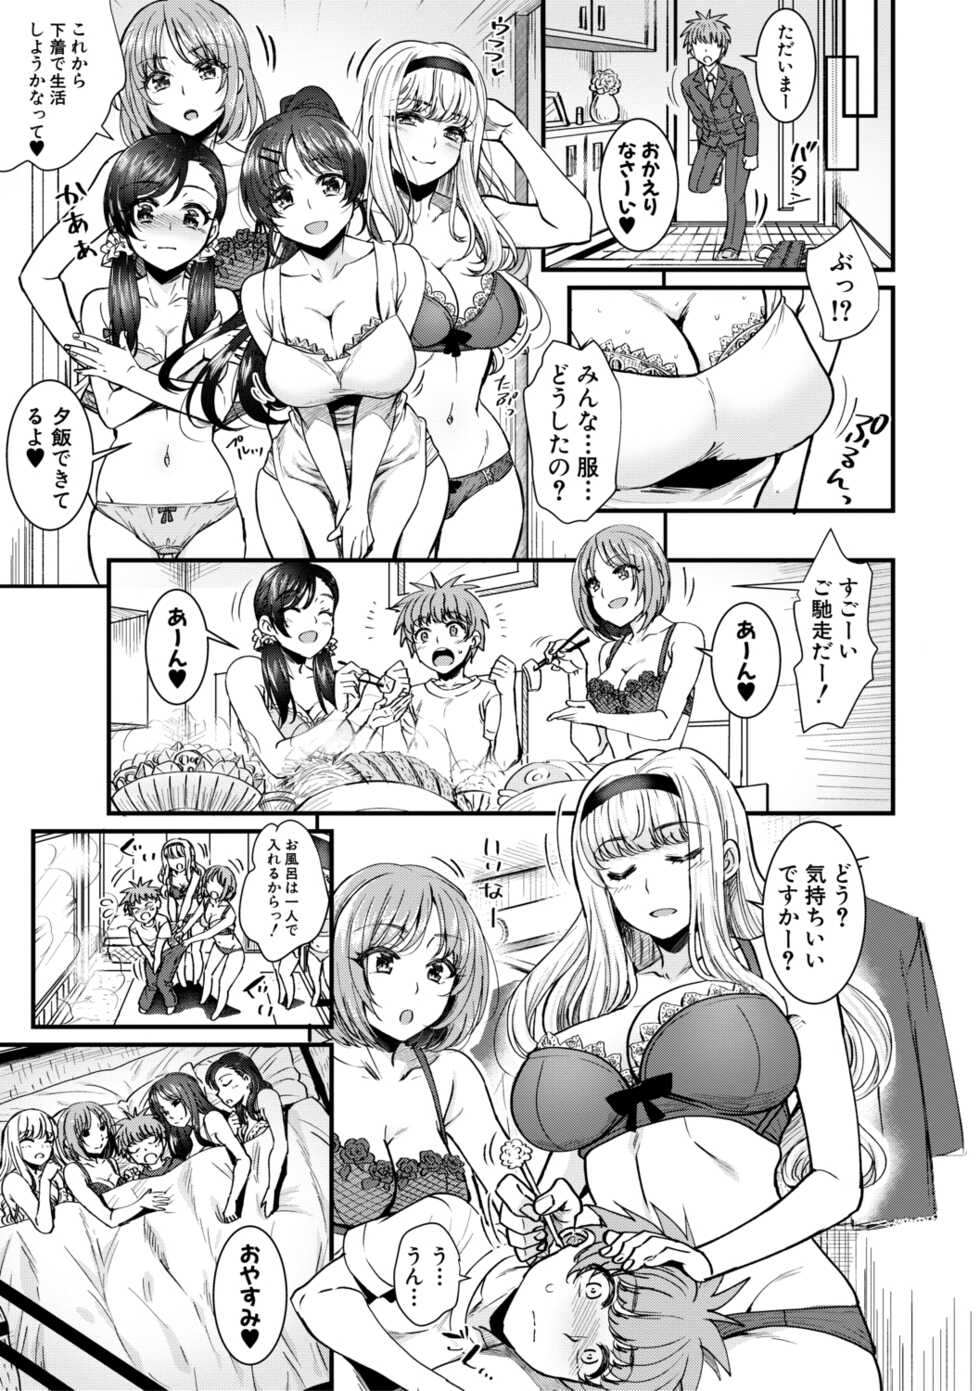 [Poyamu] Yonshimai wa Otouto to Harem shitai! - Four sisters want to harem with their younger brother. [Digital] - Page 13